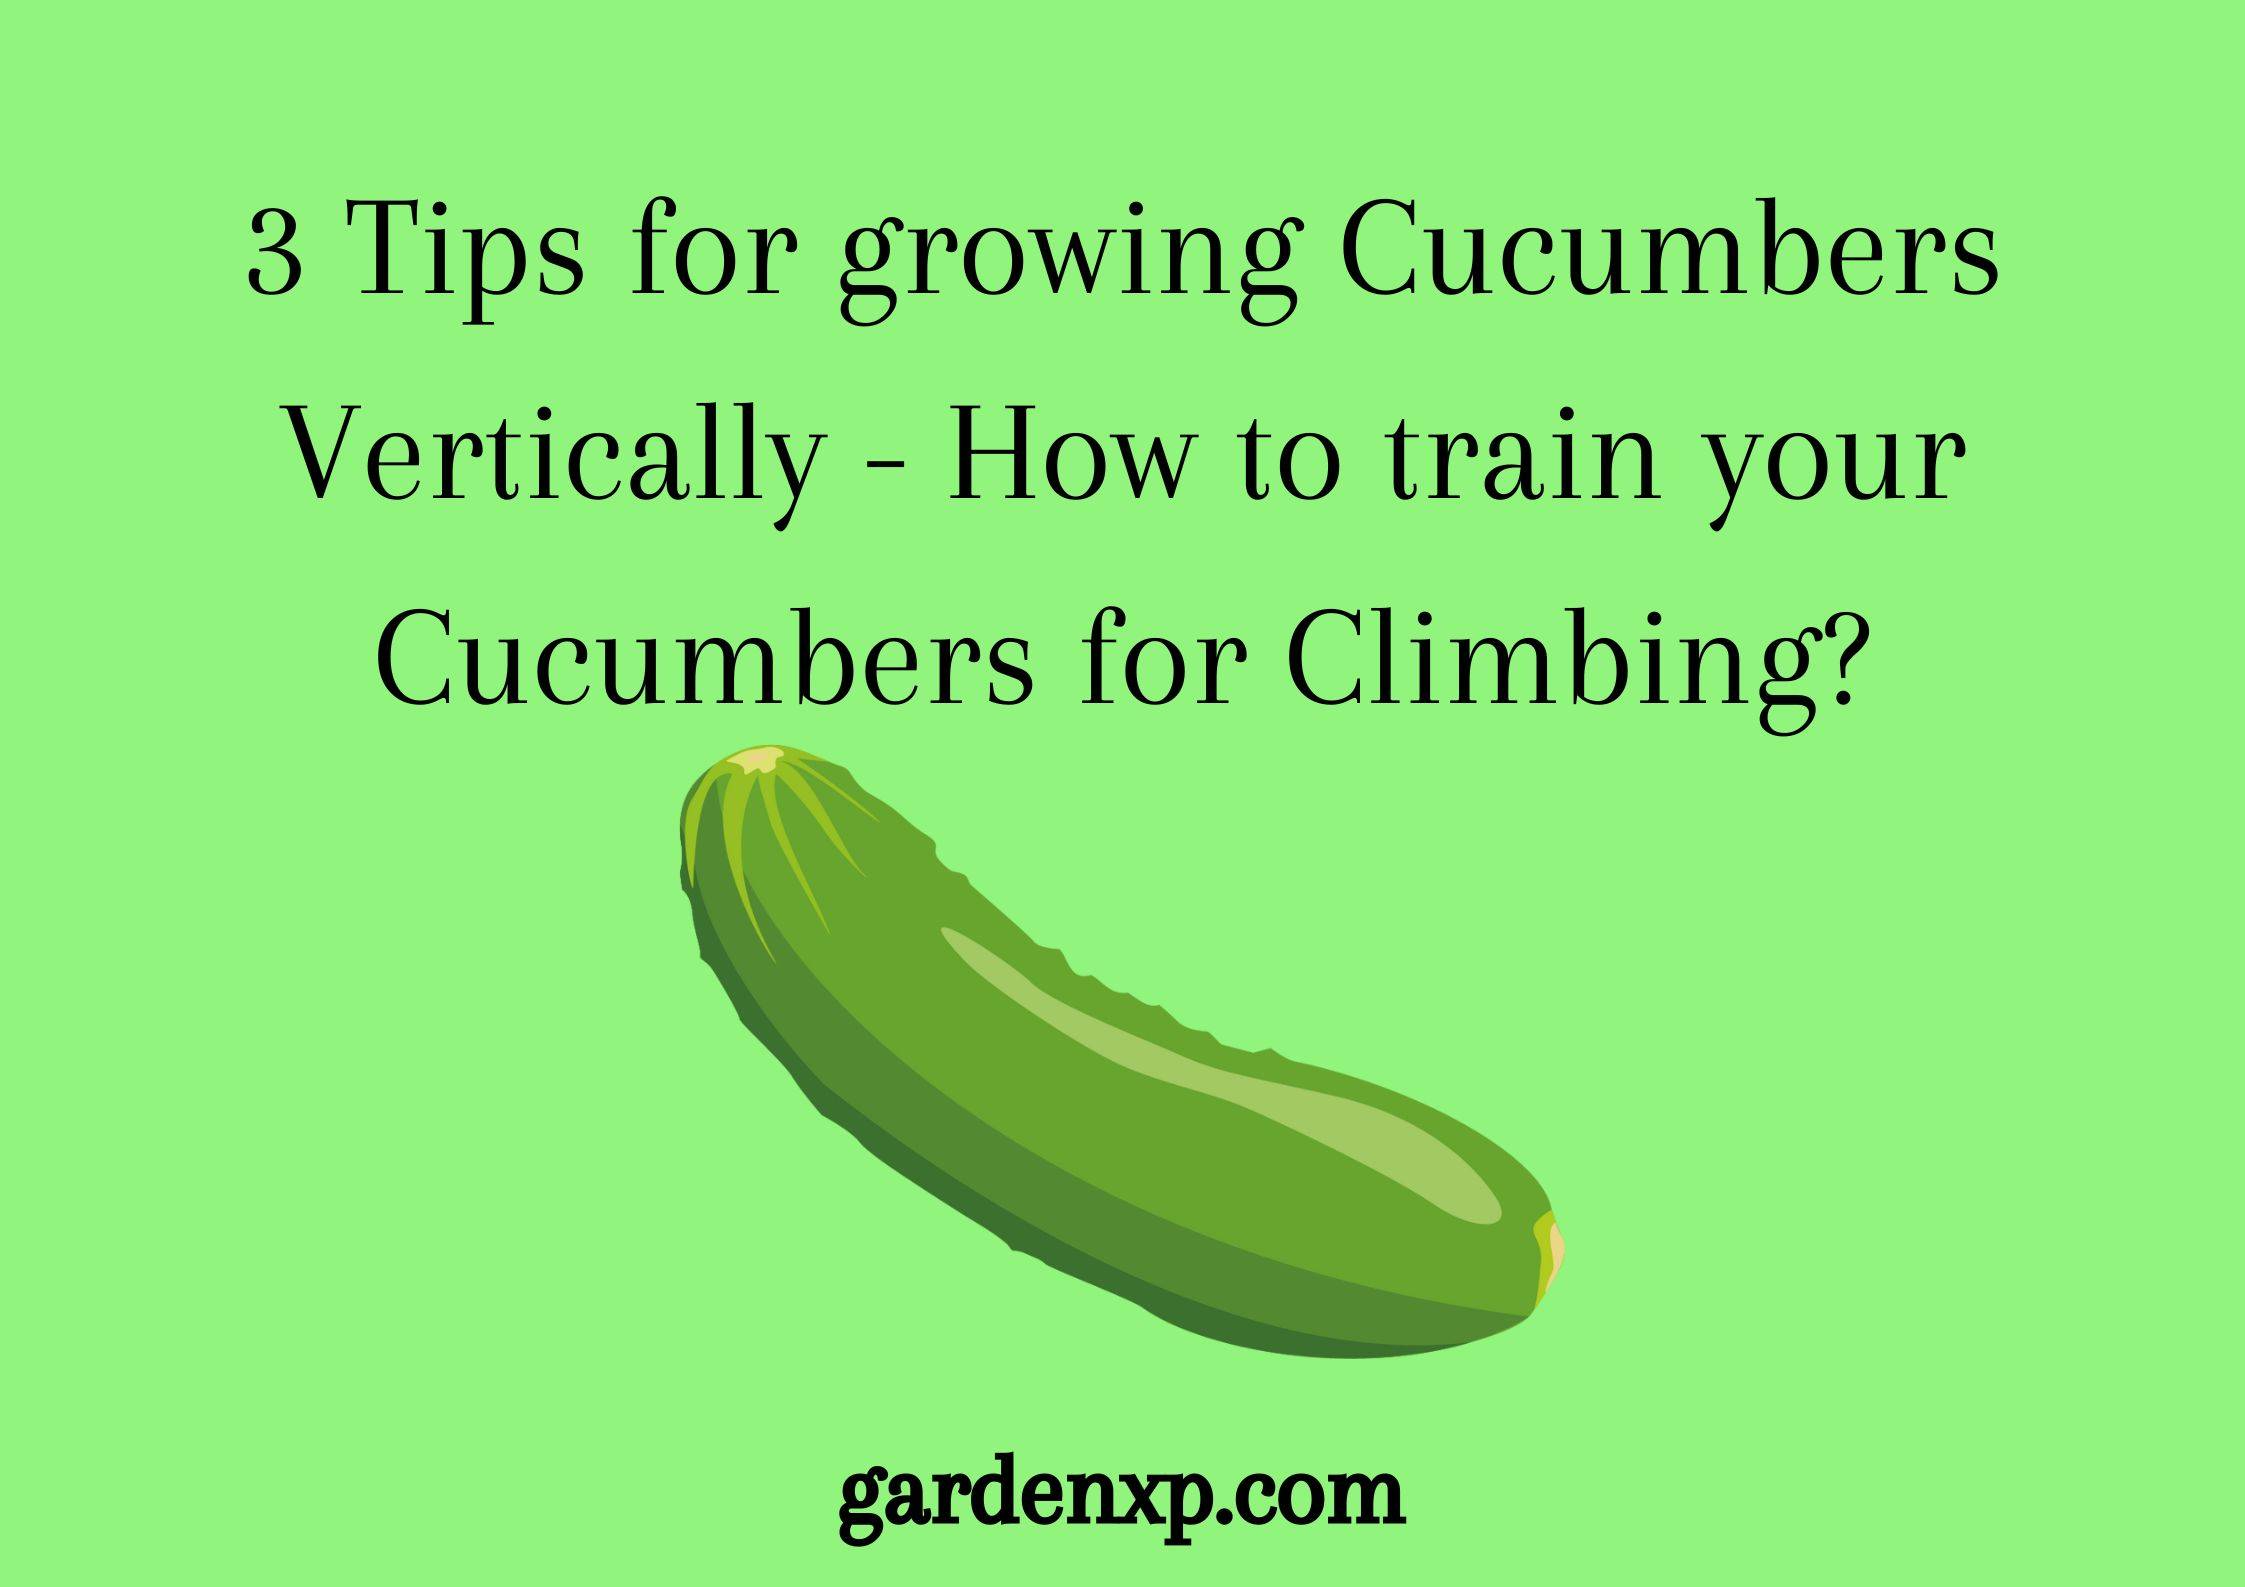 3 Tips for growing Cucumbers Vertically - How to train your Cucumbers for Climbing?